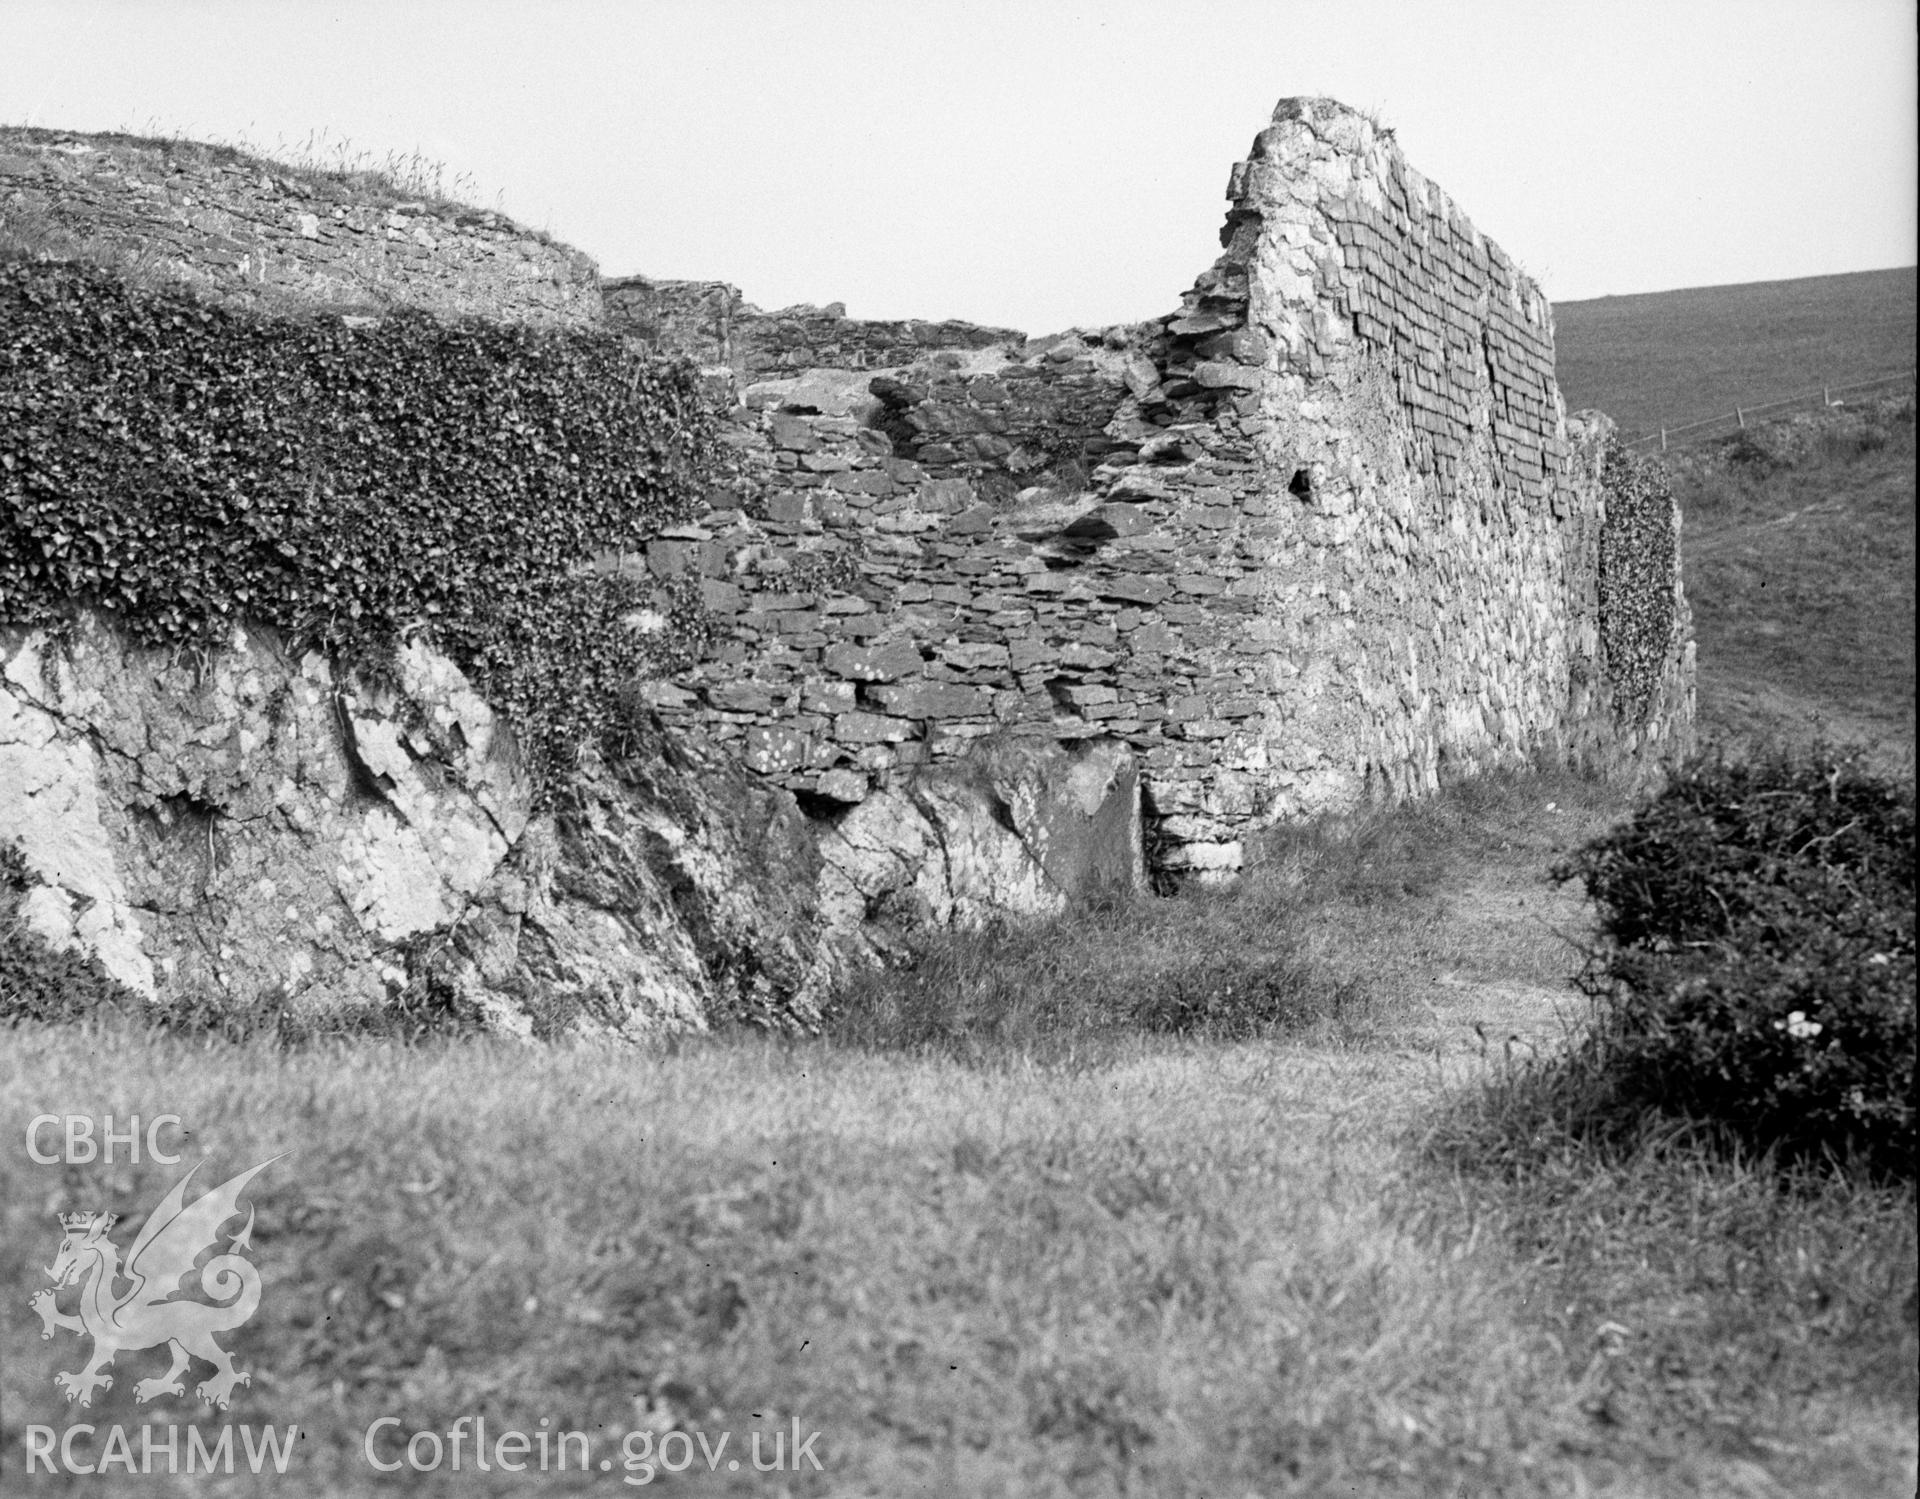 Digital copy of a nitrate negative showing Castle Point Old Fort, Fishguard.